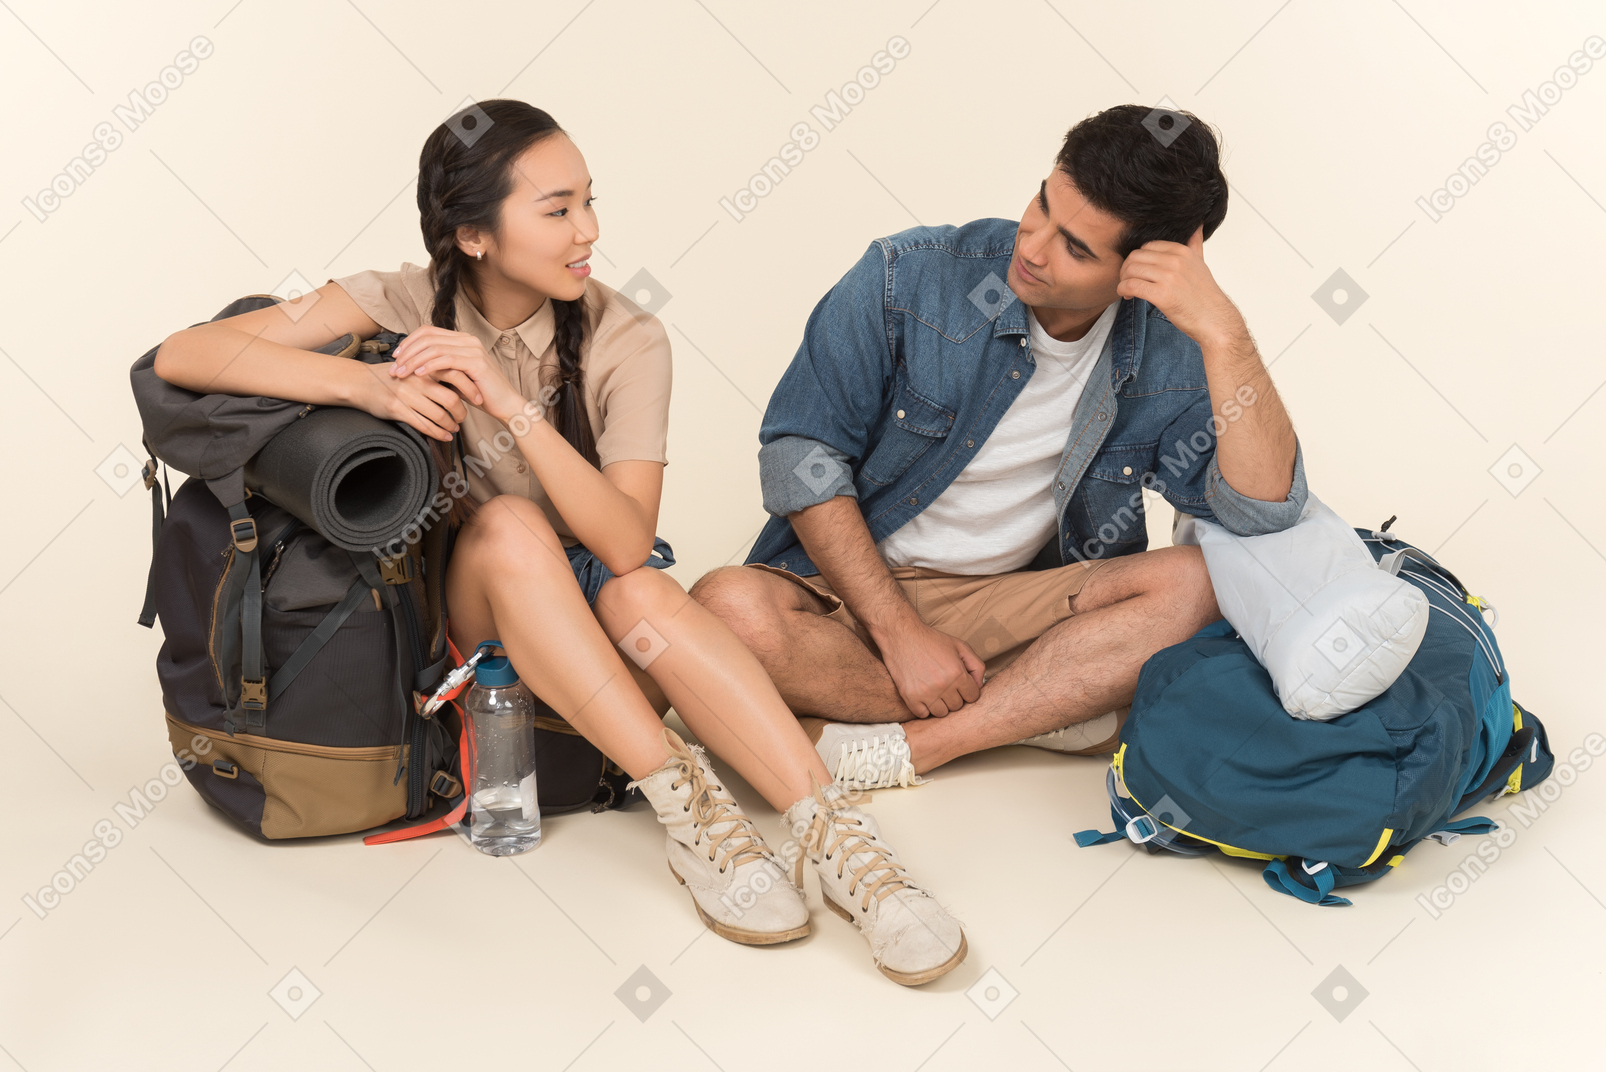 Young interracial couple sitting near backpacks and talking